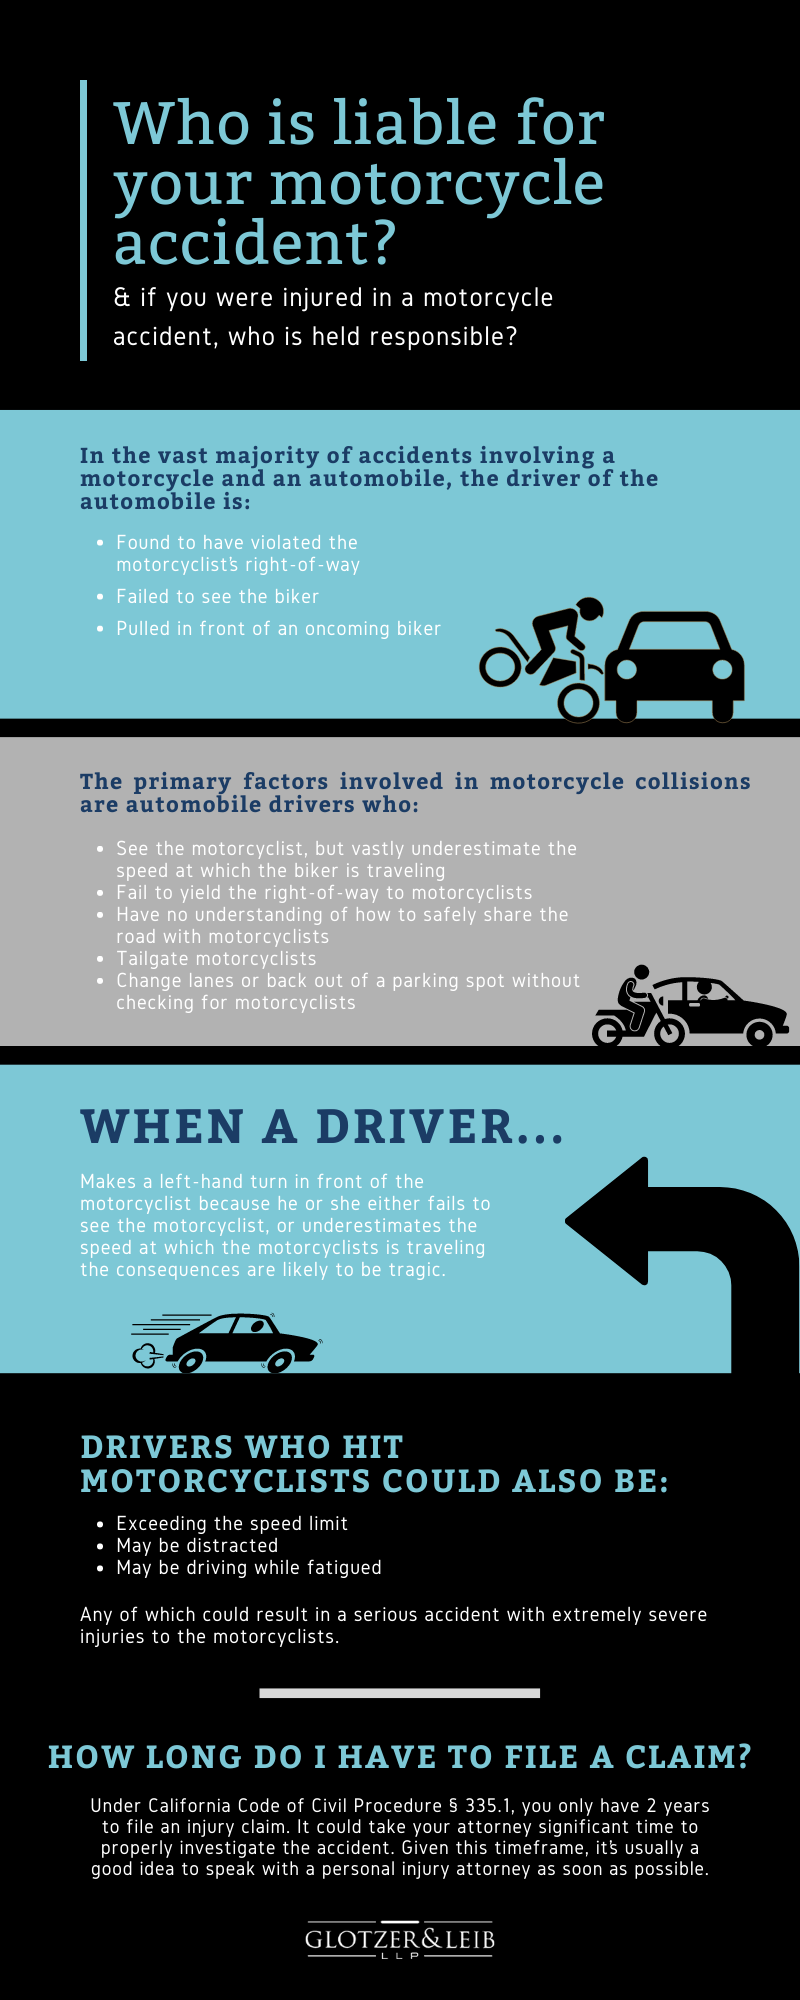 Who Is Liable For Your Motorcycle Accident? Infographic